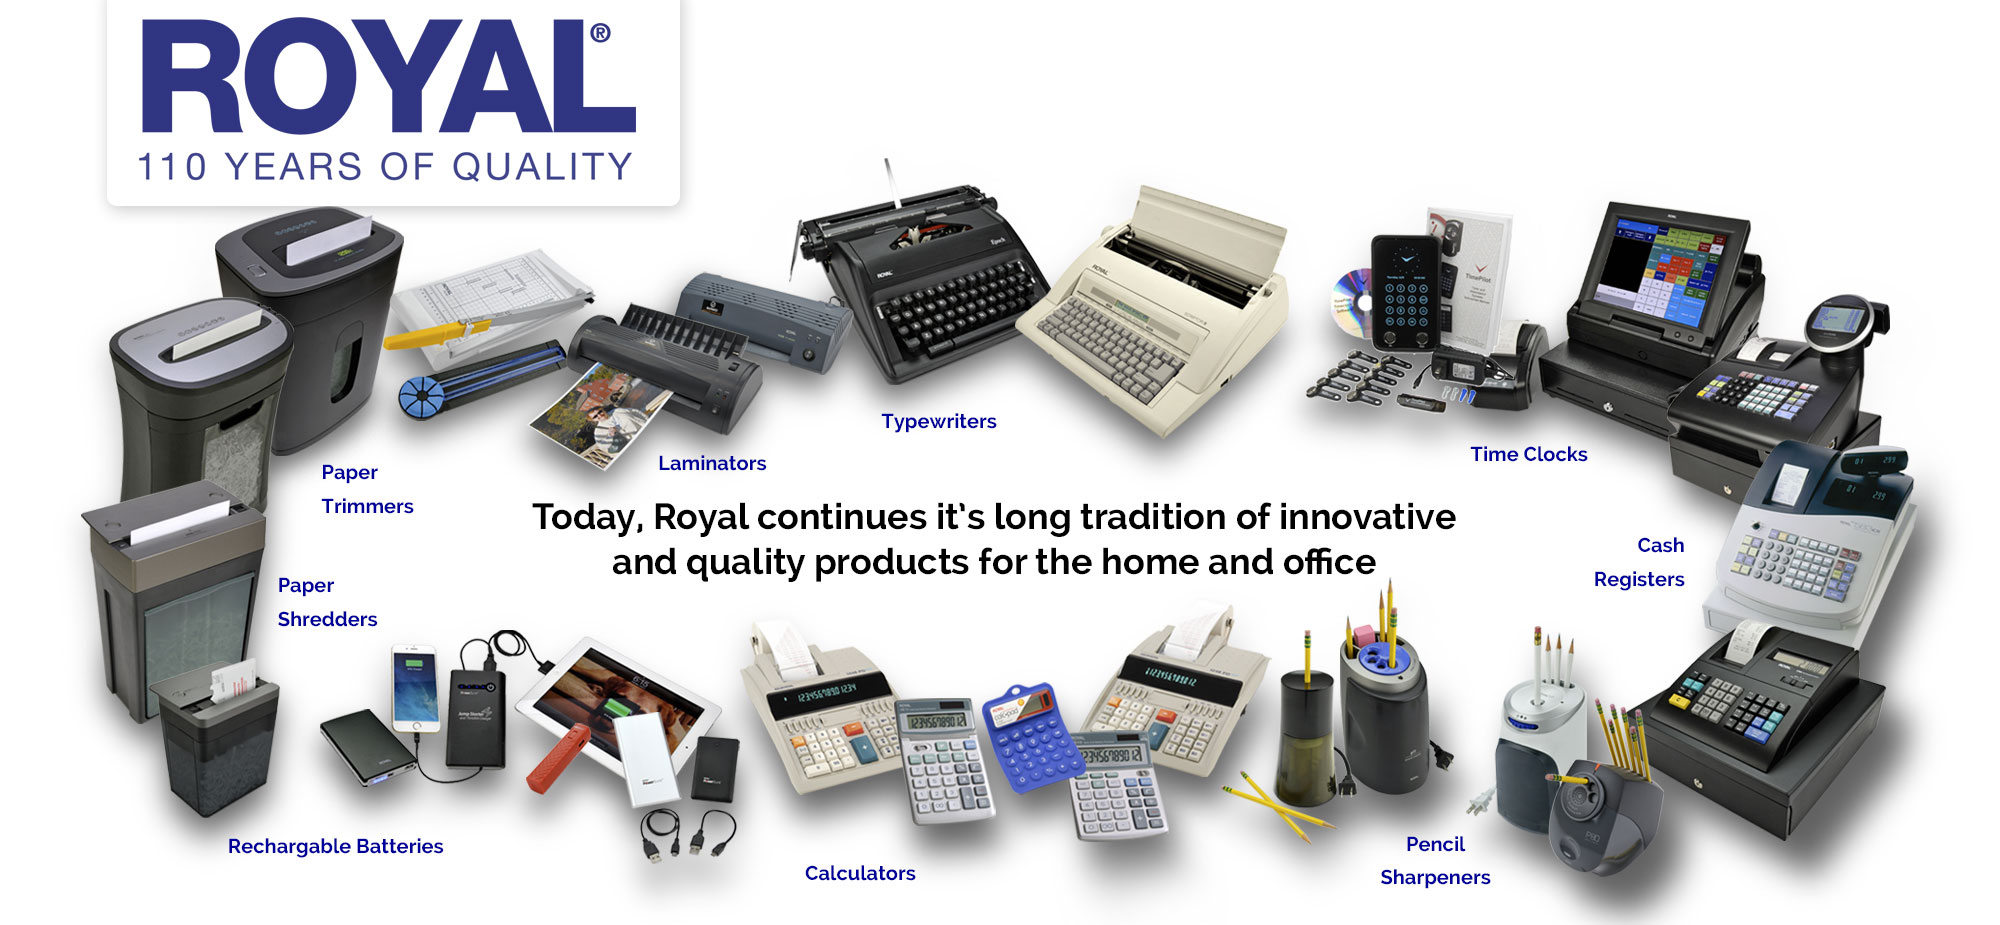 Royal consumer information products